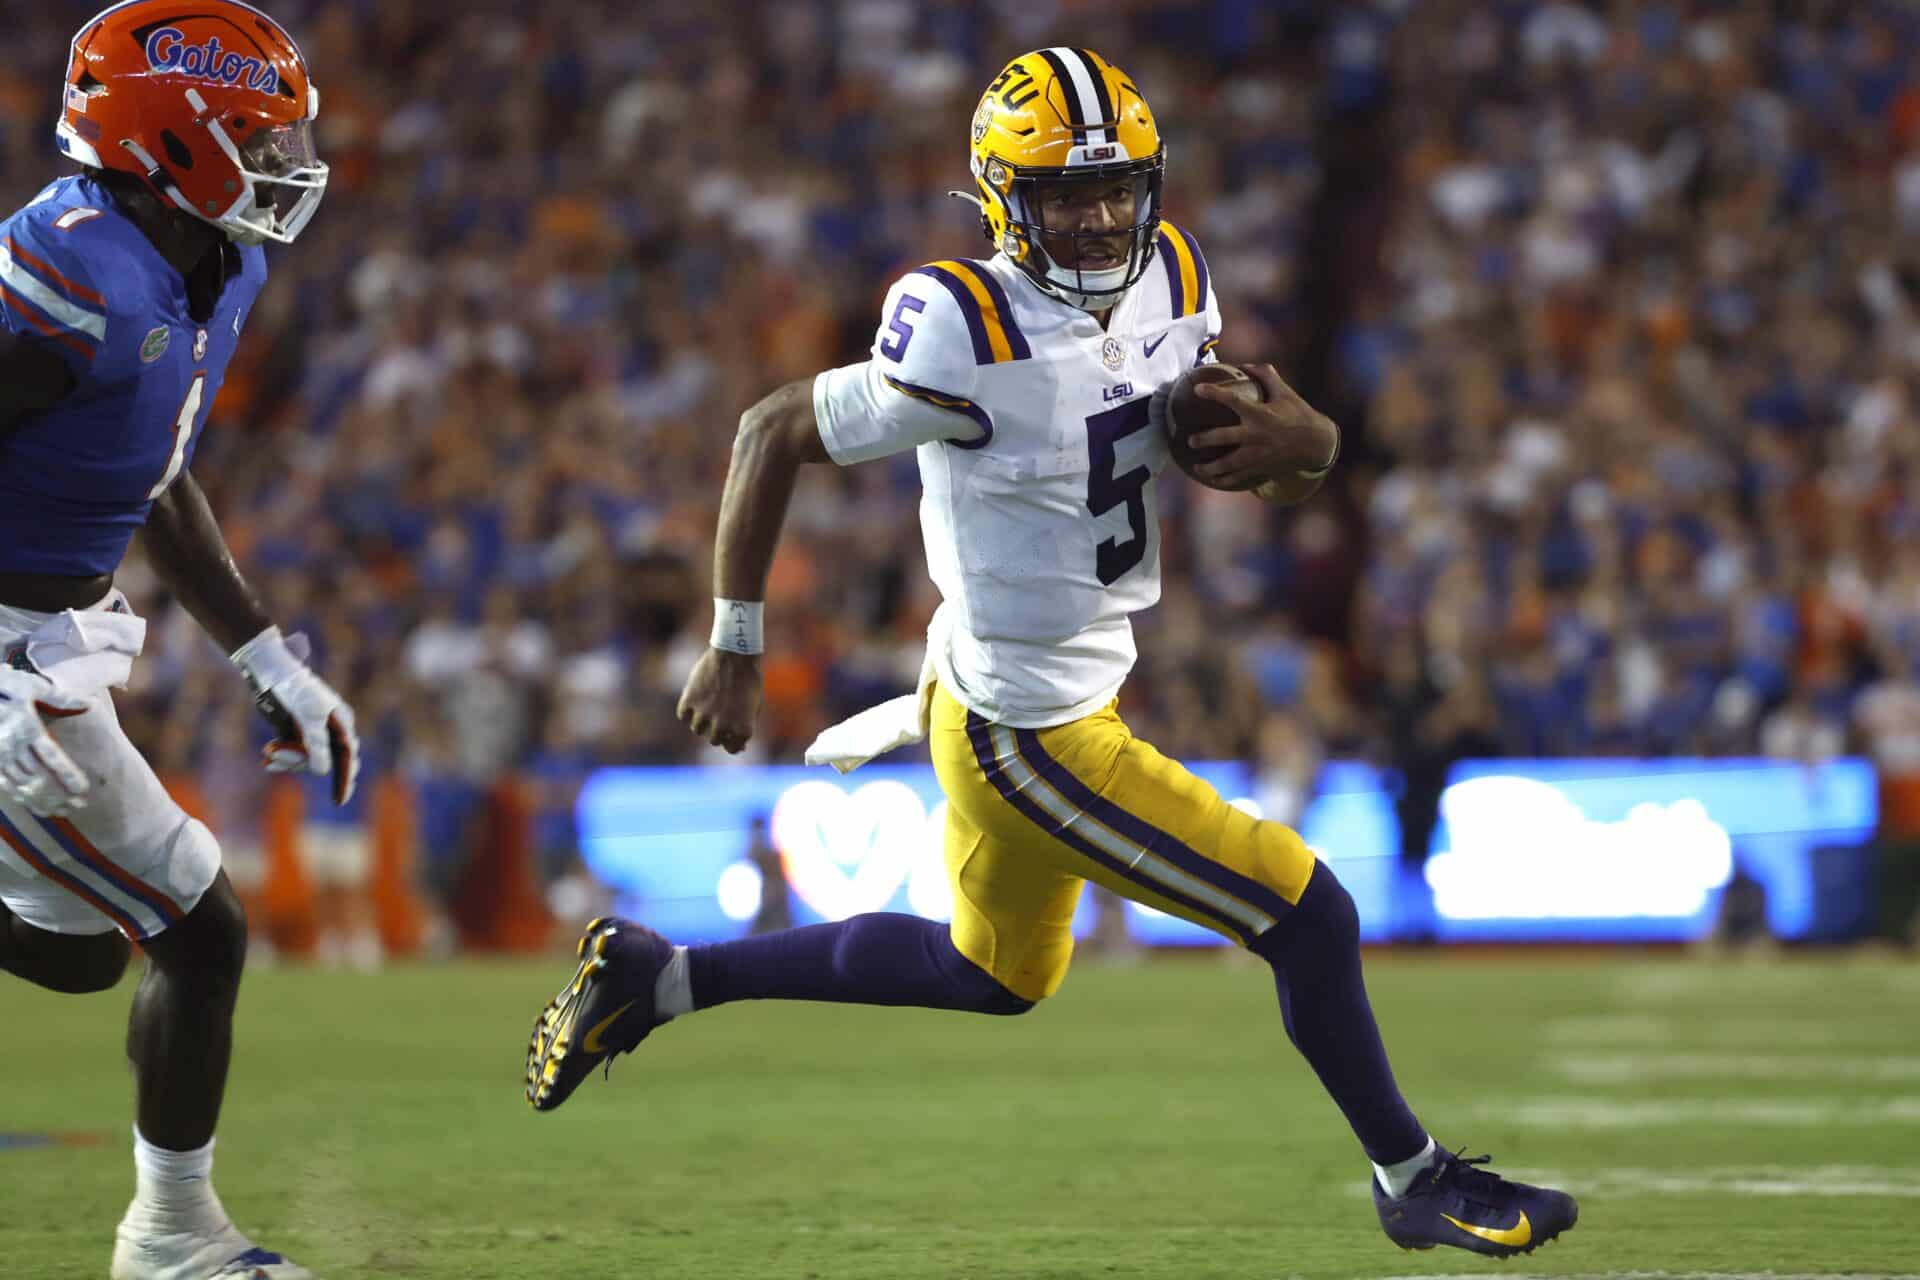 Oct 15, 2022; Gainesville, Florida, USA; LSU Tigers quarterback Jayden Daniels (5) runs with the ball against the Florida Gators during the second half at Ben Hill Griffin Stadium. Mandatory Credit: Kim Klement-USA TODAY Sports